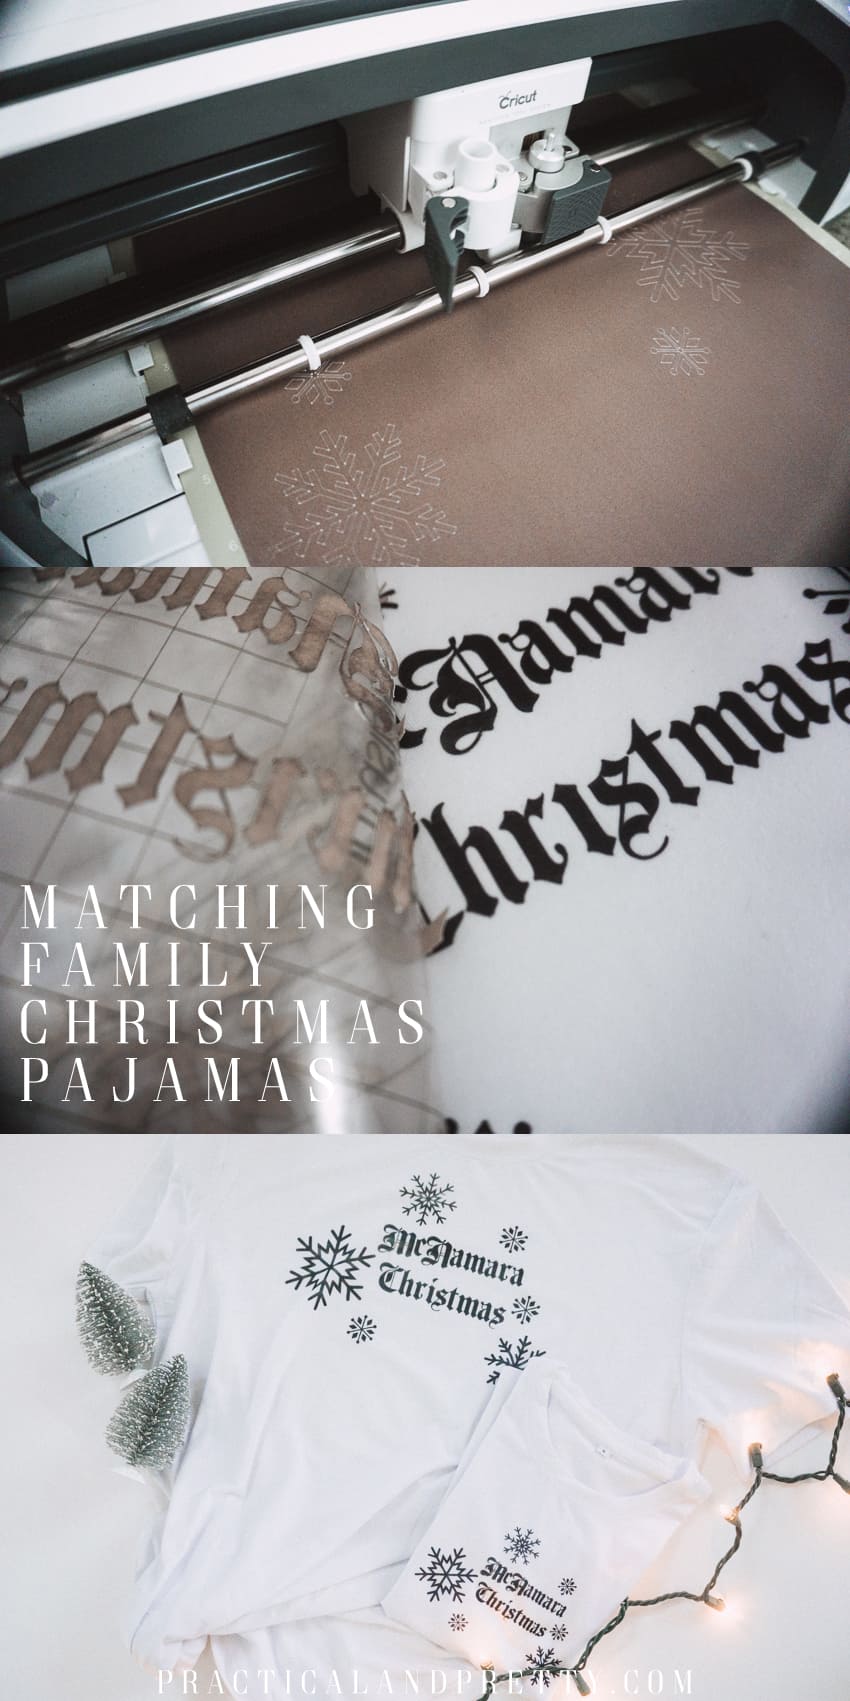 Make your matching family Christmas pajamas as unique as you with infusible ink and the Cricut. Never used infusible ink before? I walk you through it!